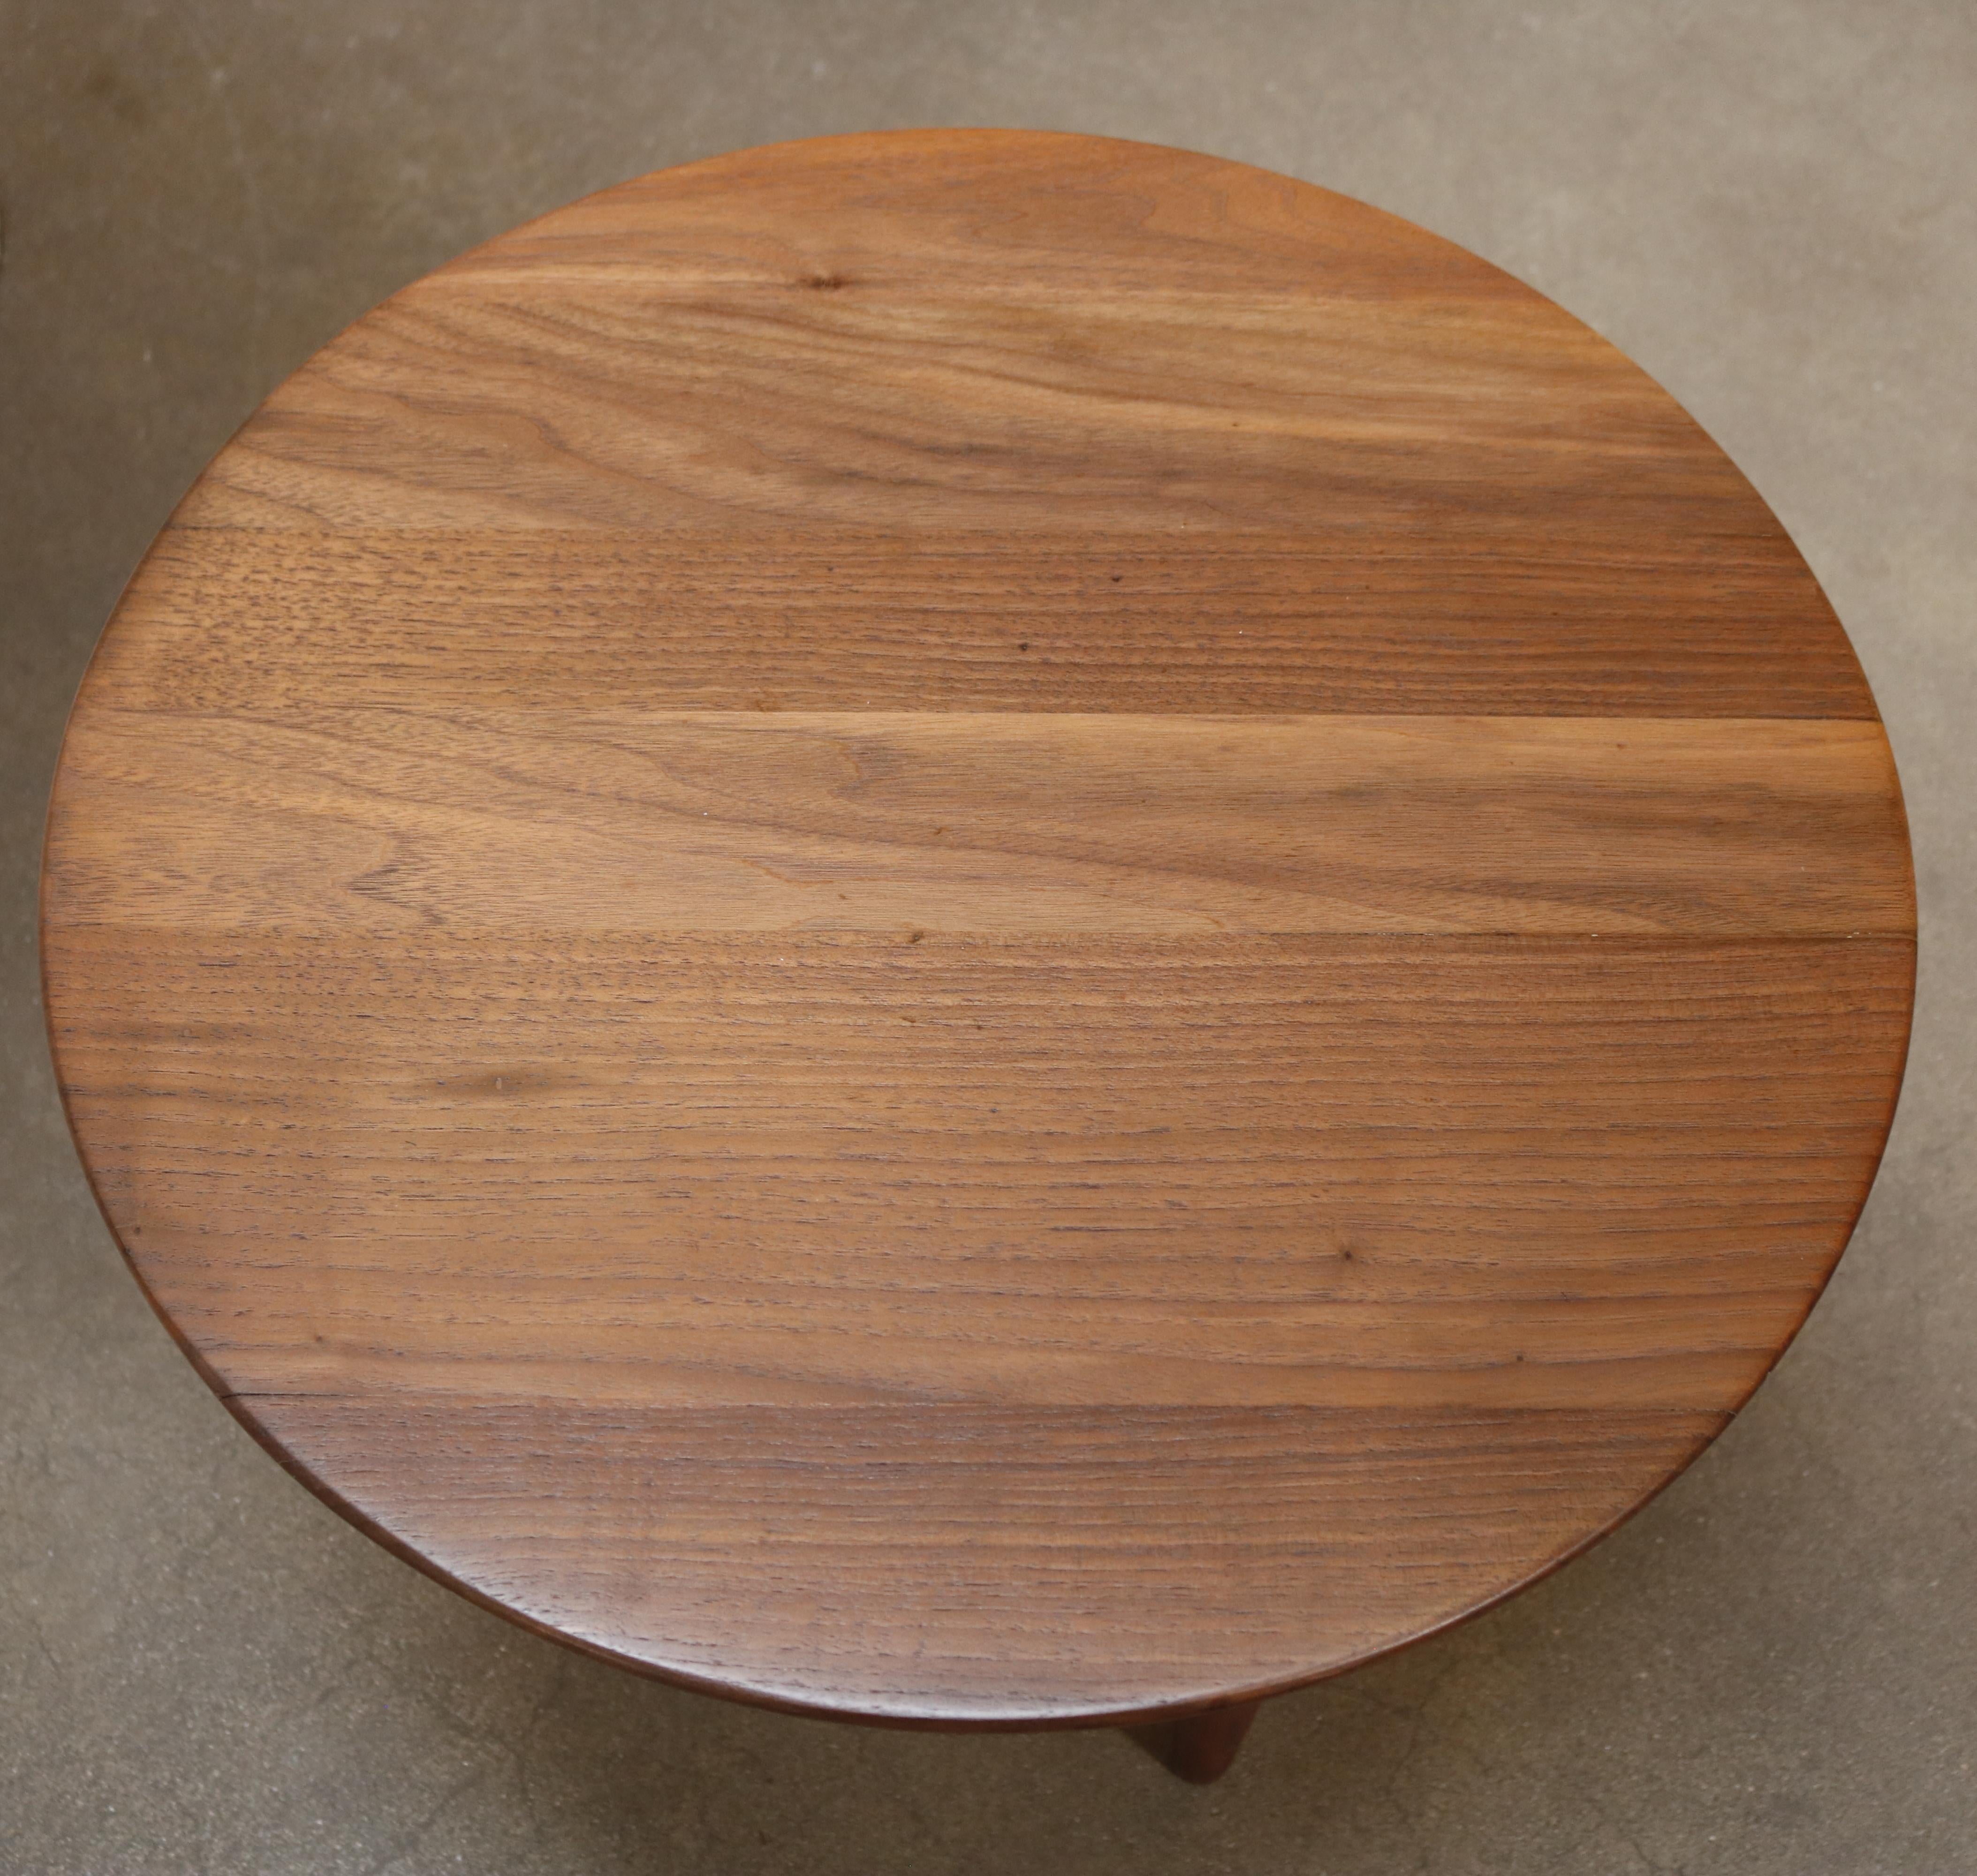 A petite, solid walnut circular gueridon with three pointy table legs.